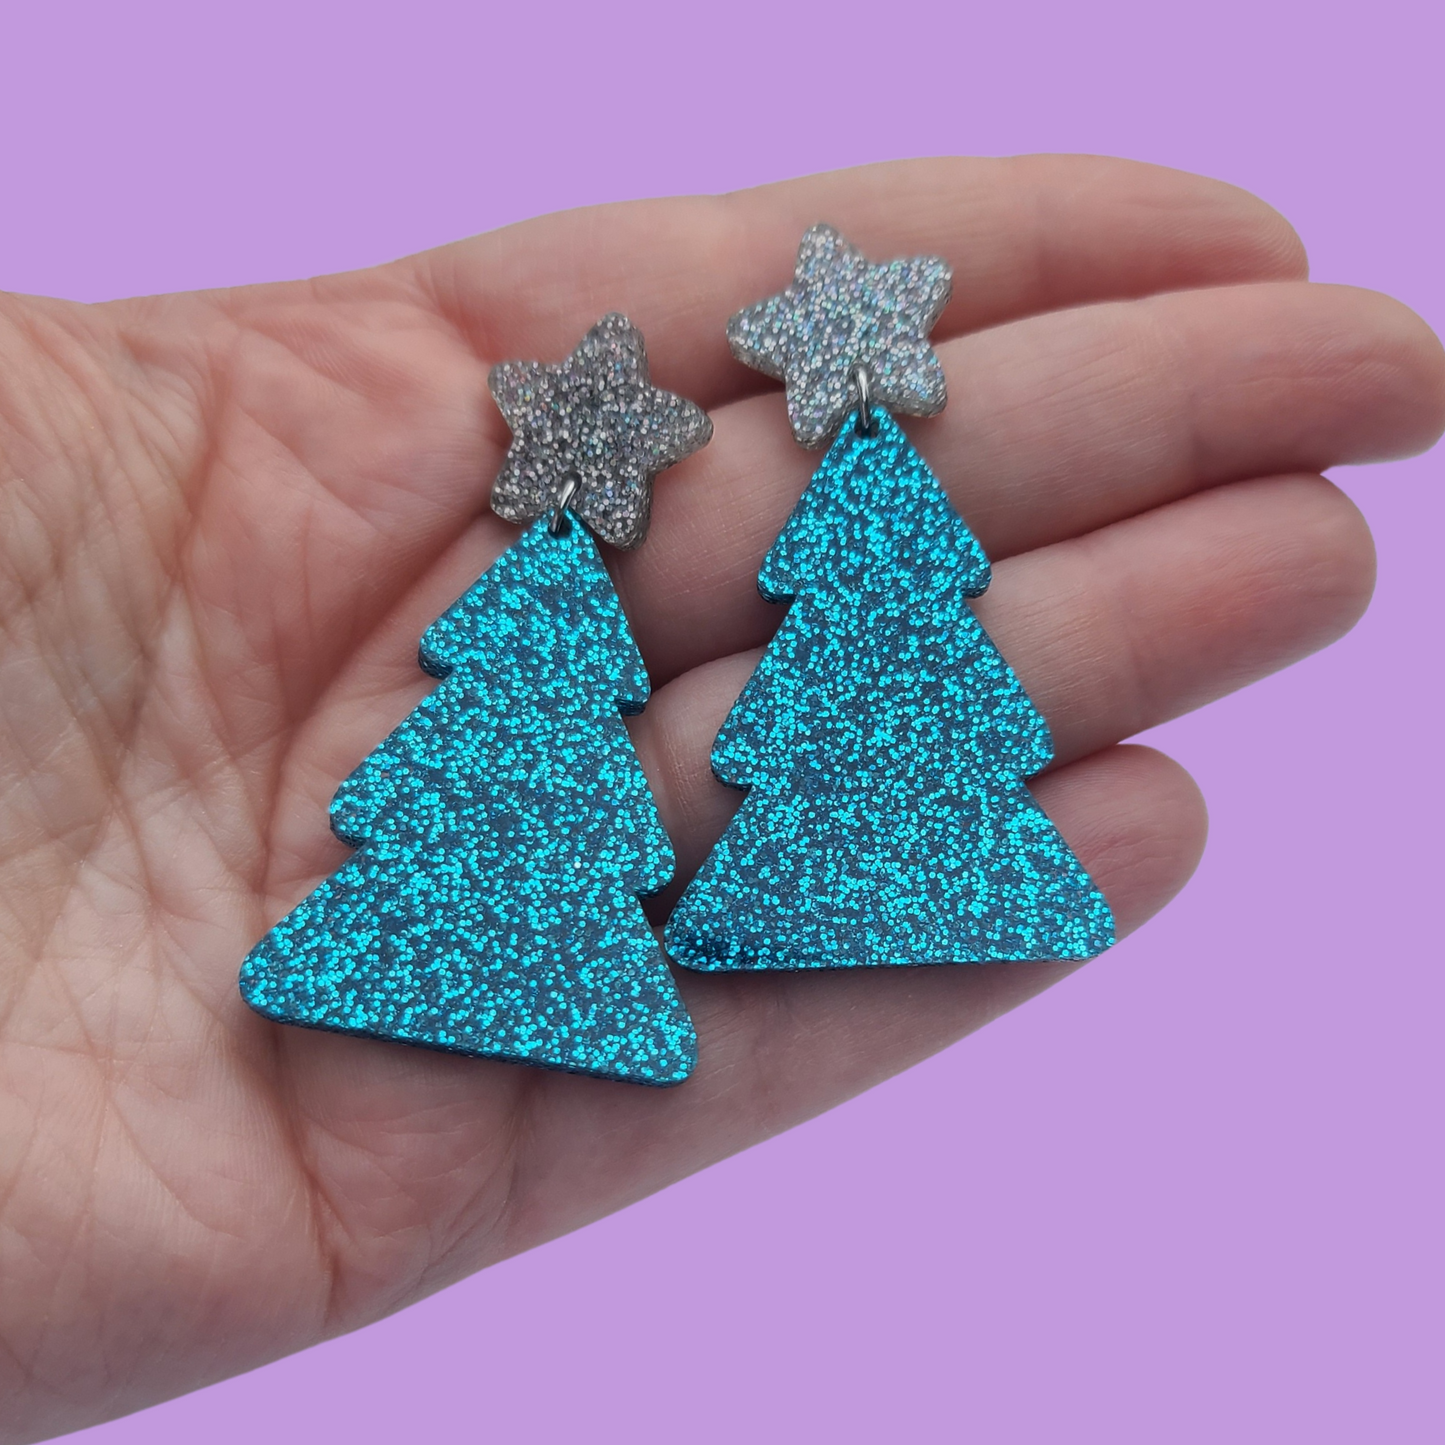 Christmas Trees - Blue and Silver Glitter - Christmas